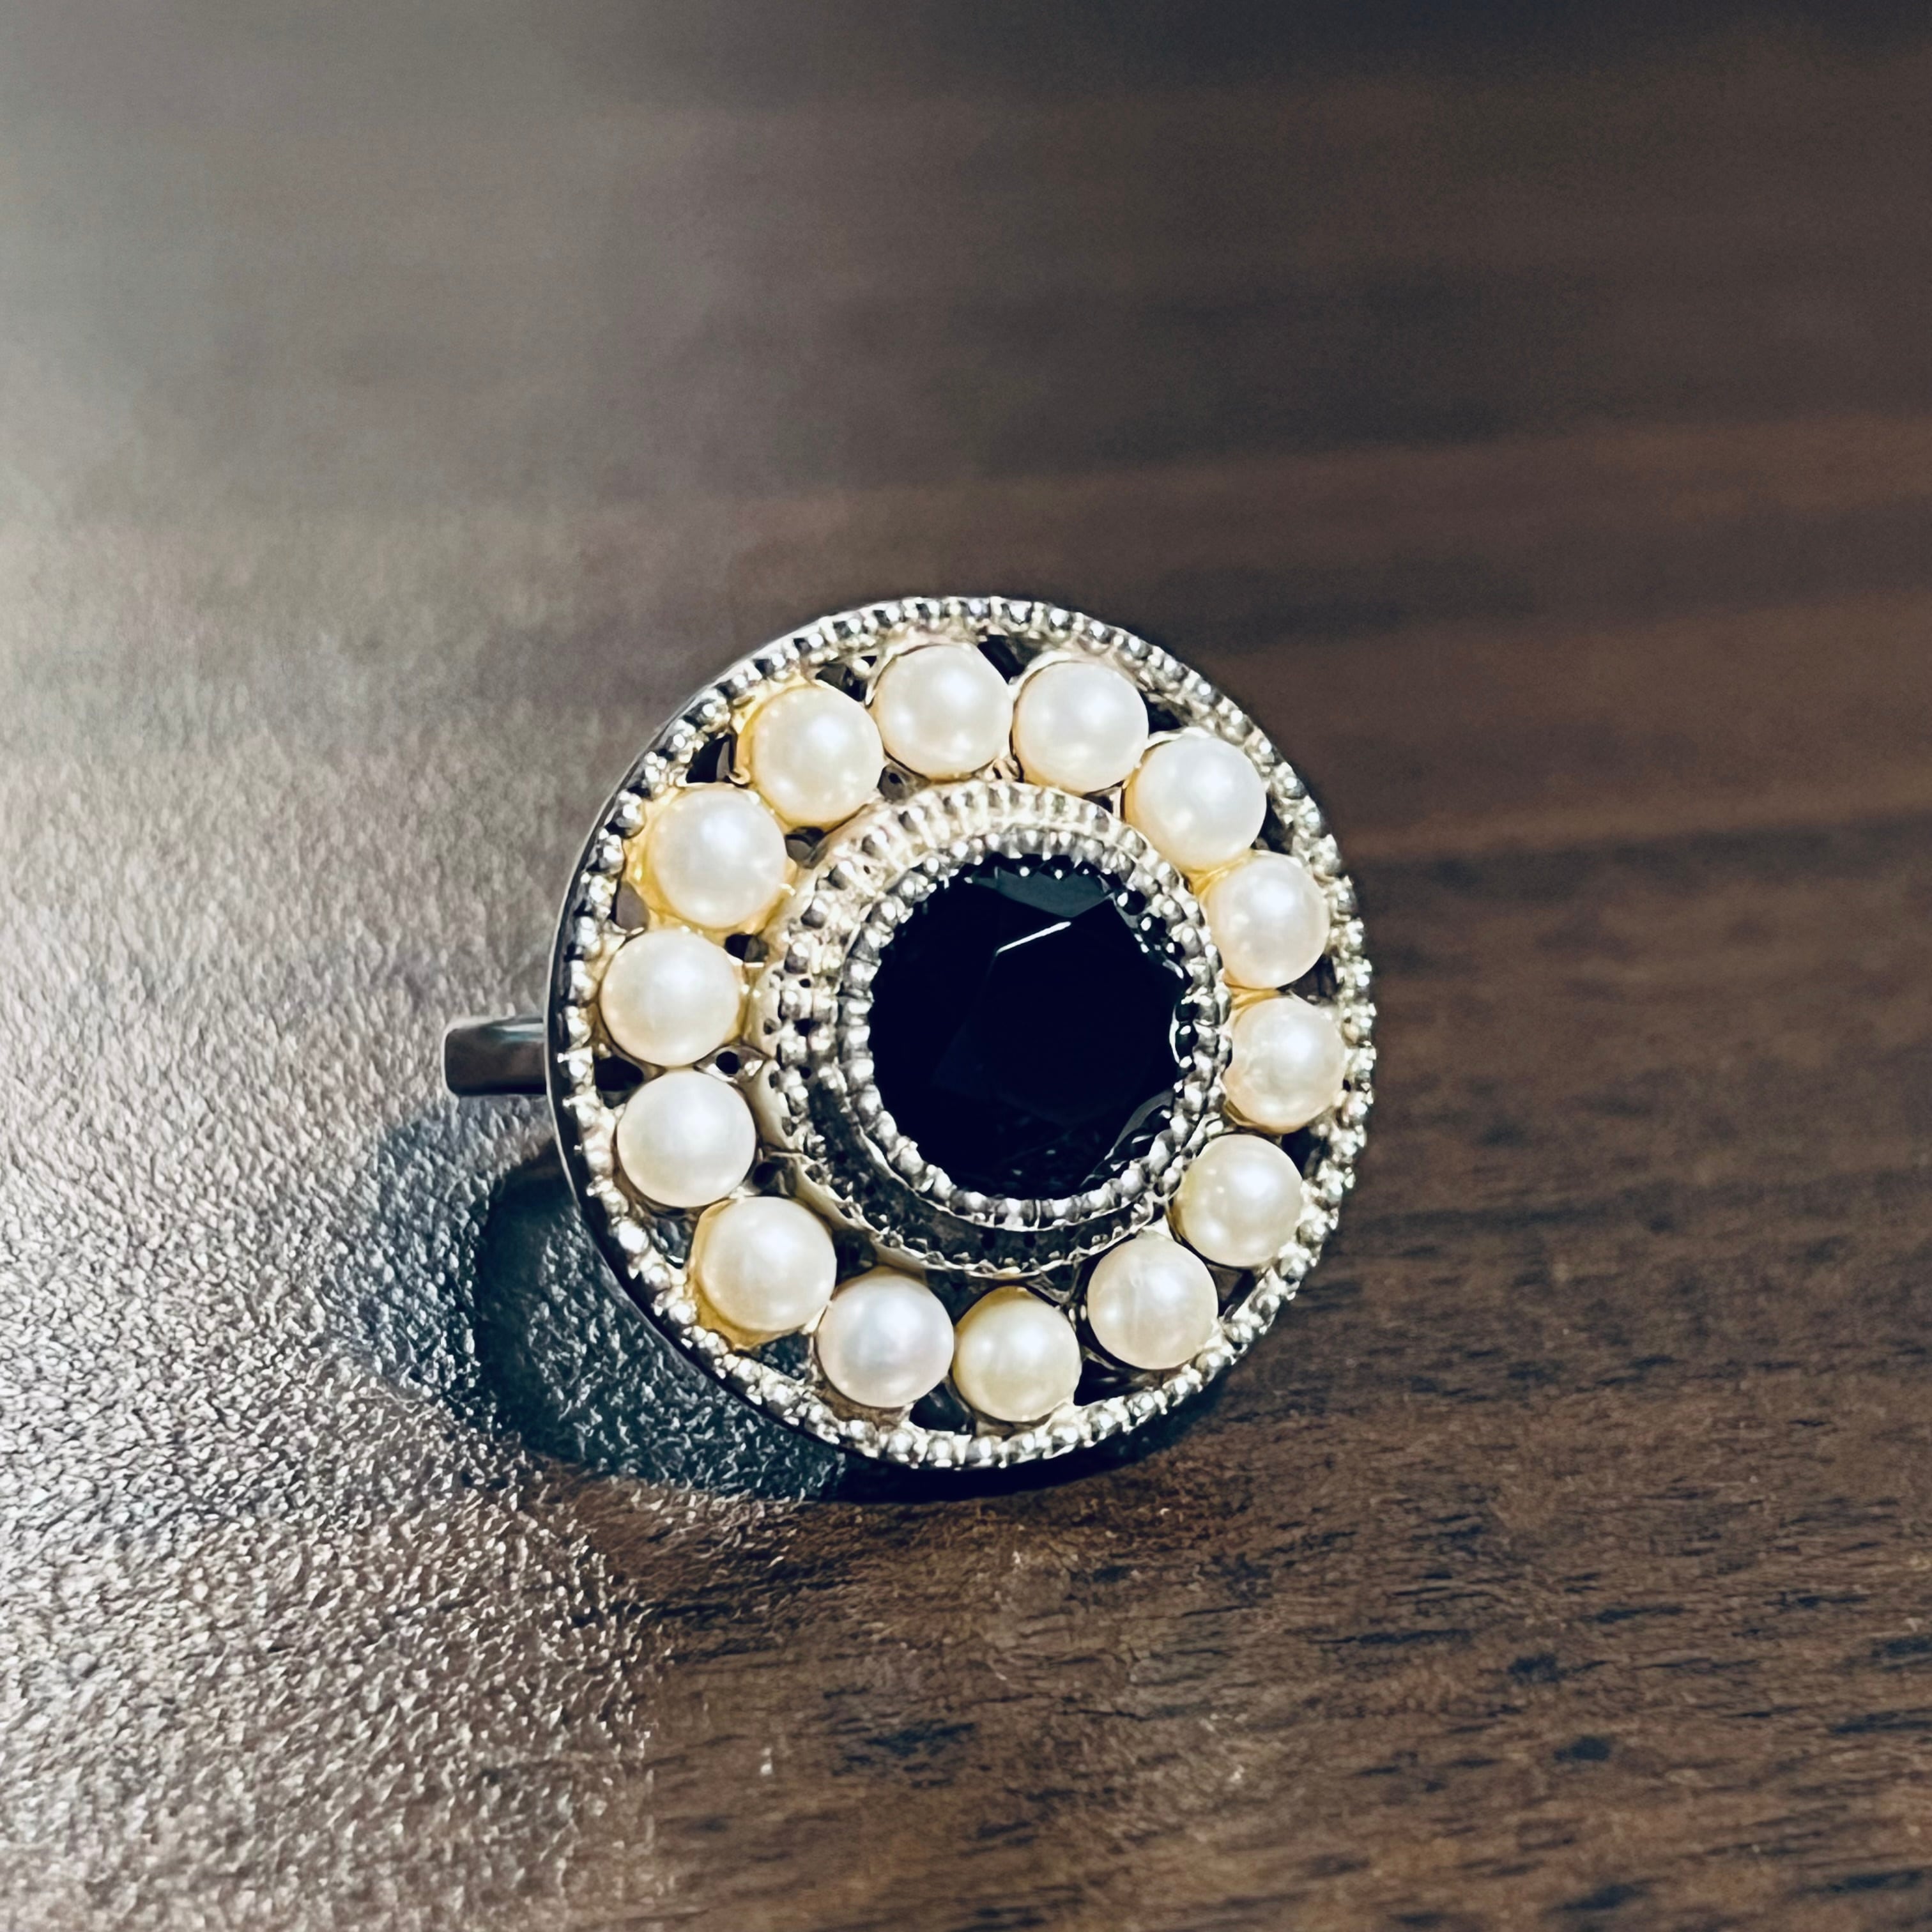 OLD TIFFANY & CO. Black Onyx & Pearl Ring #8.5 Sterling Silver